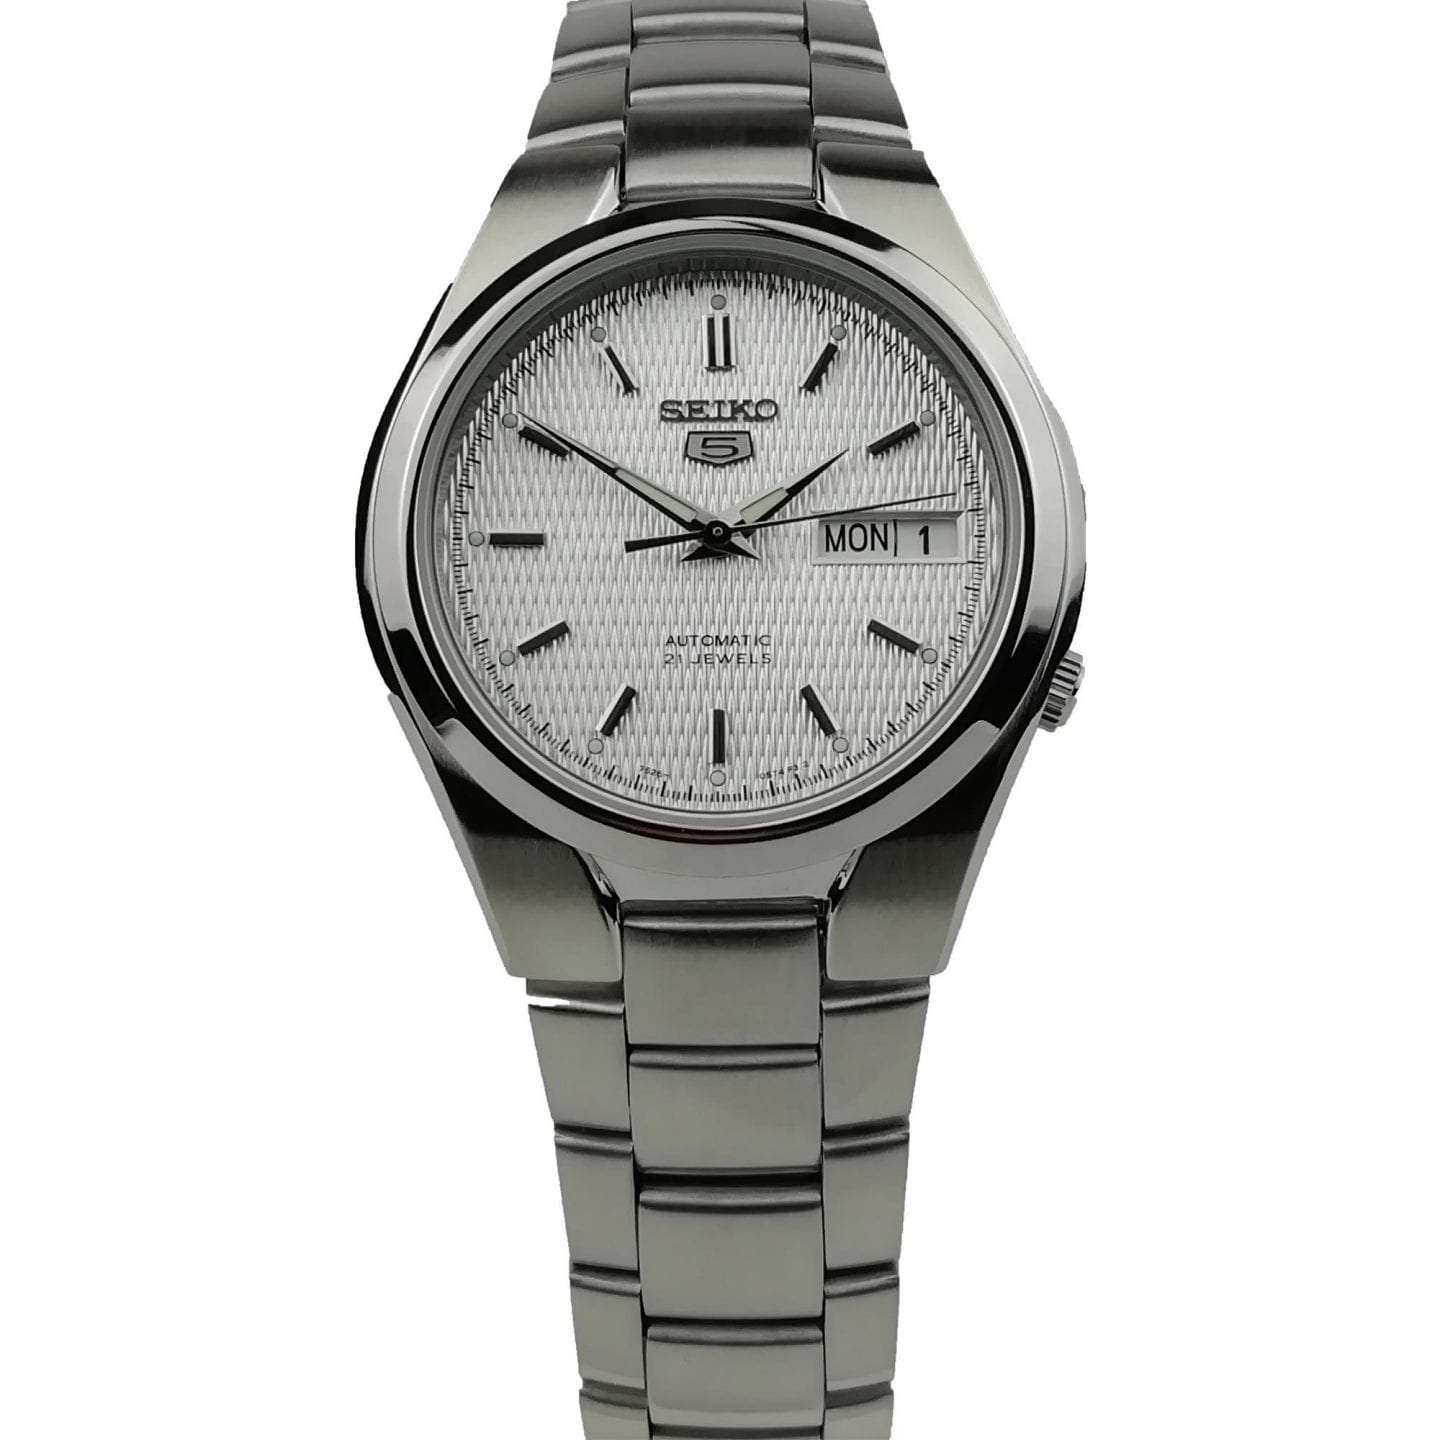 Seiko 5 Automatic White Dial Stainless Steel Men’s Watch SNK601K1